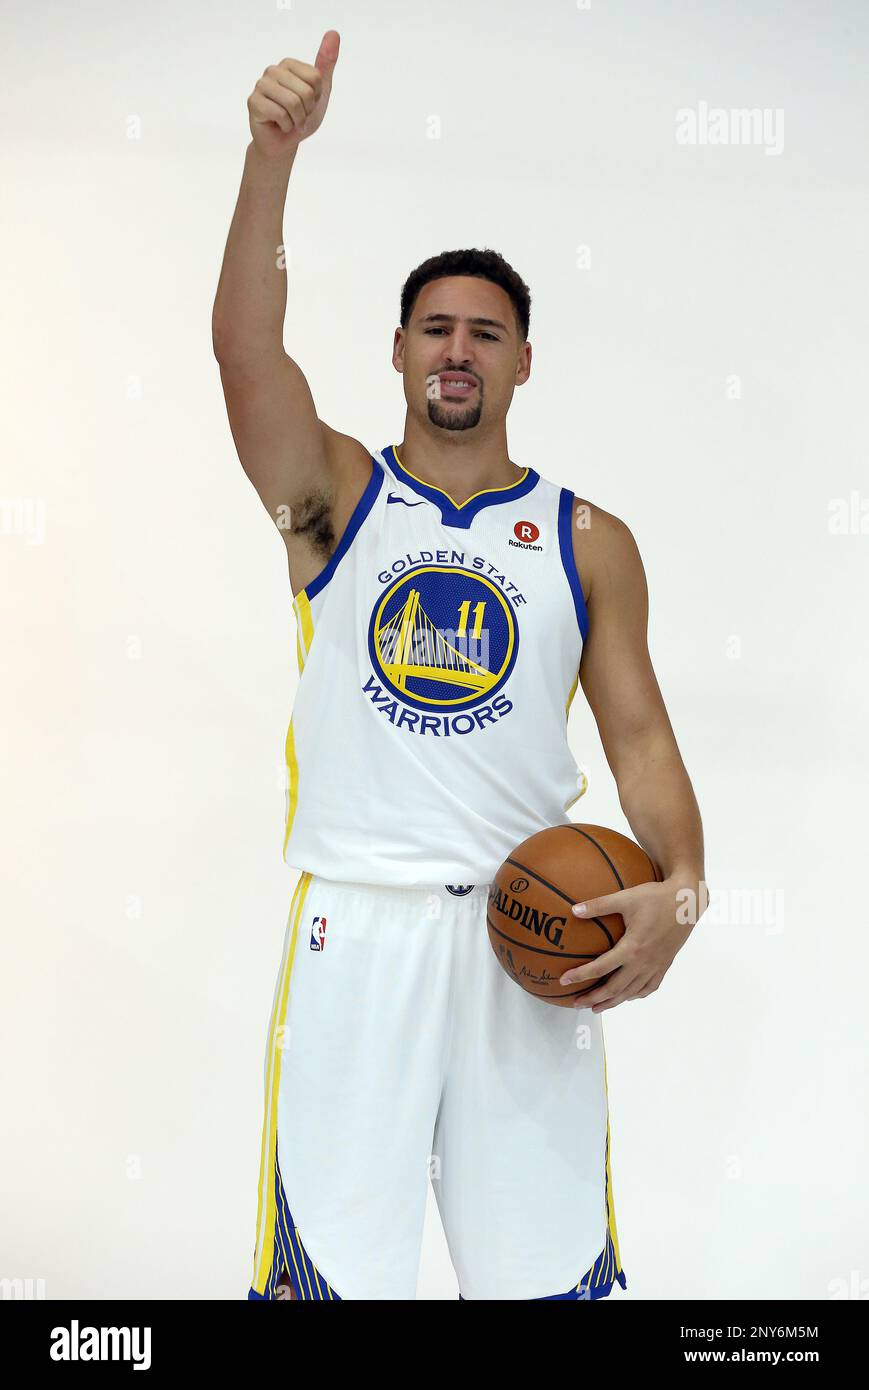 OAKLAND, CA - SEPTEMBER 22: Klay Thompson appears at the Golden State  Warriors media day September 22, 2017 at the Rakuten Performance Center in  Oakland, CA. (Photo by Daniel Gluskoter/Icon Sportswire) (Icon